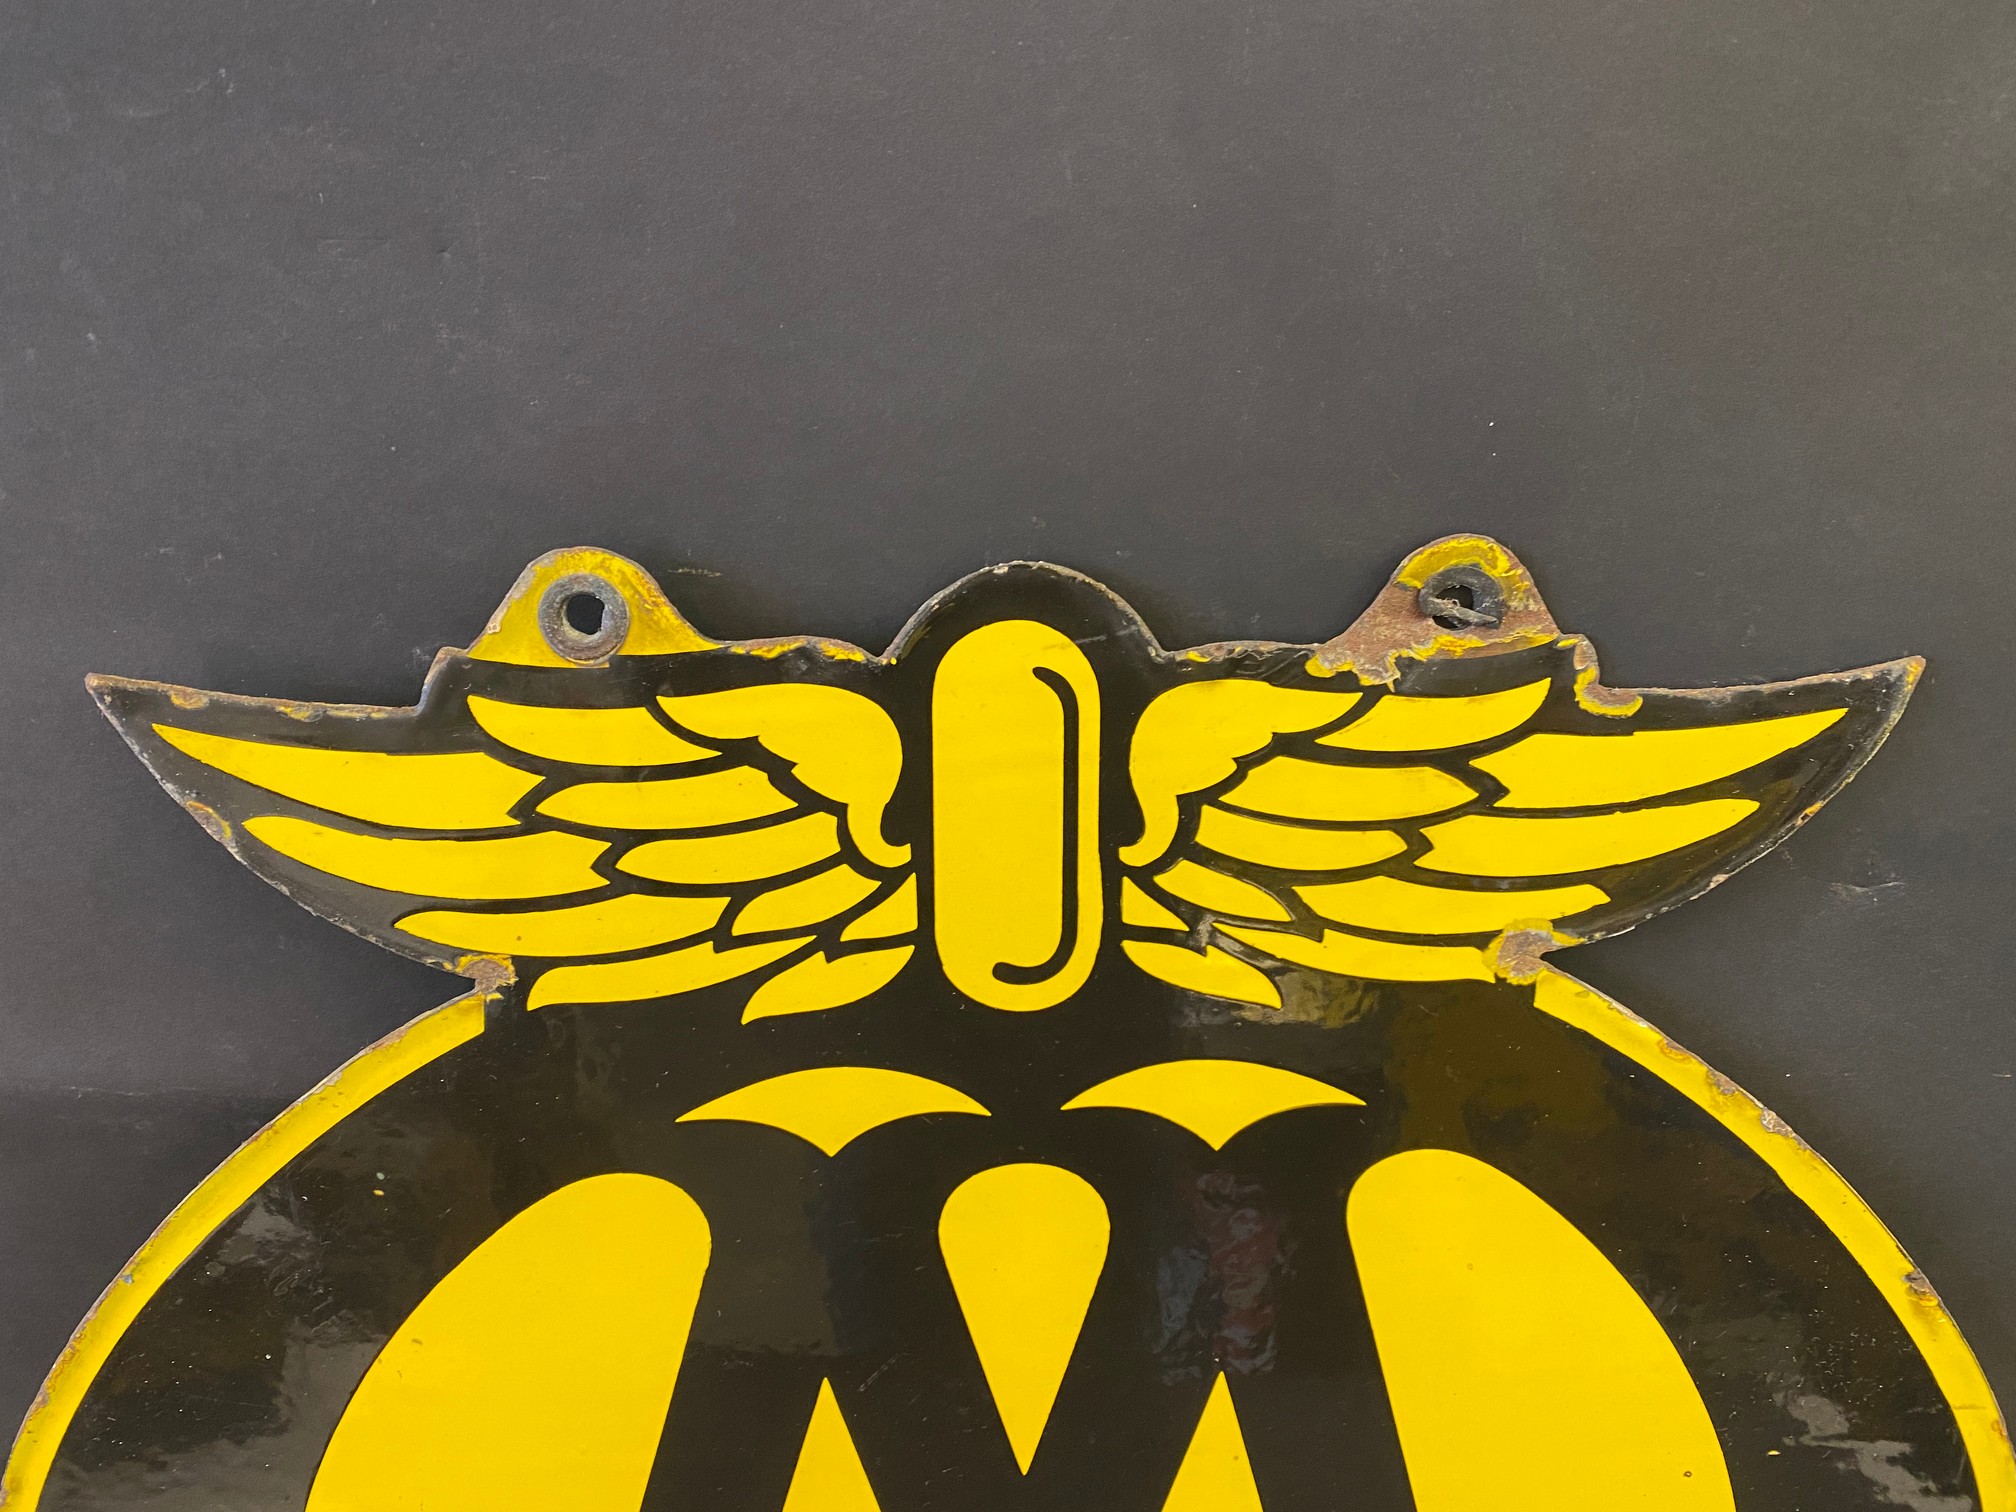 An AA Garage double sided enamel sign by Franco, 22 x 25". - Image 2 of 5